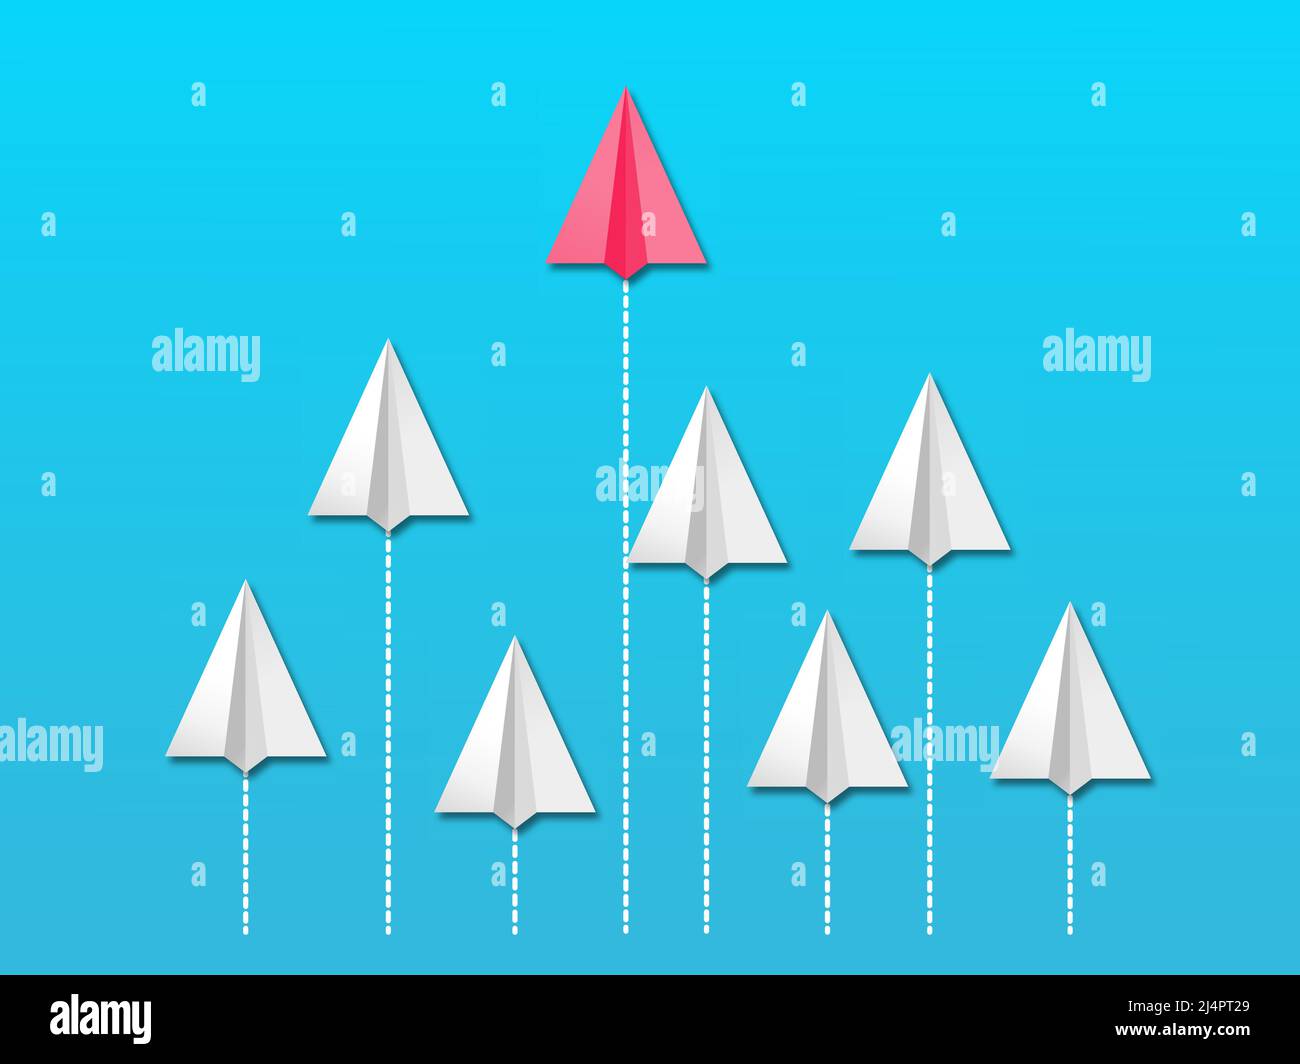 Goal setting and business strategy concep as vector illustration. Red and white paper planes flying in straight line. One paper plane getting ahead in Stock Vector